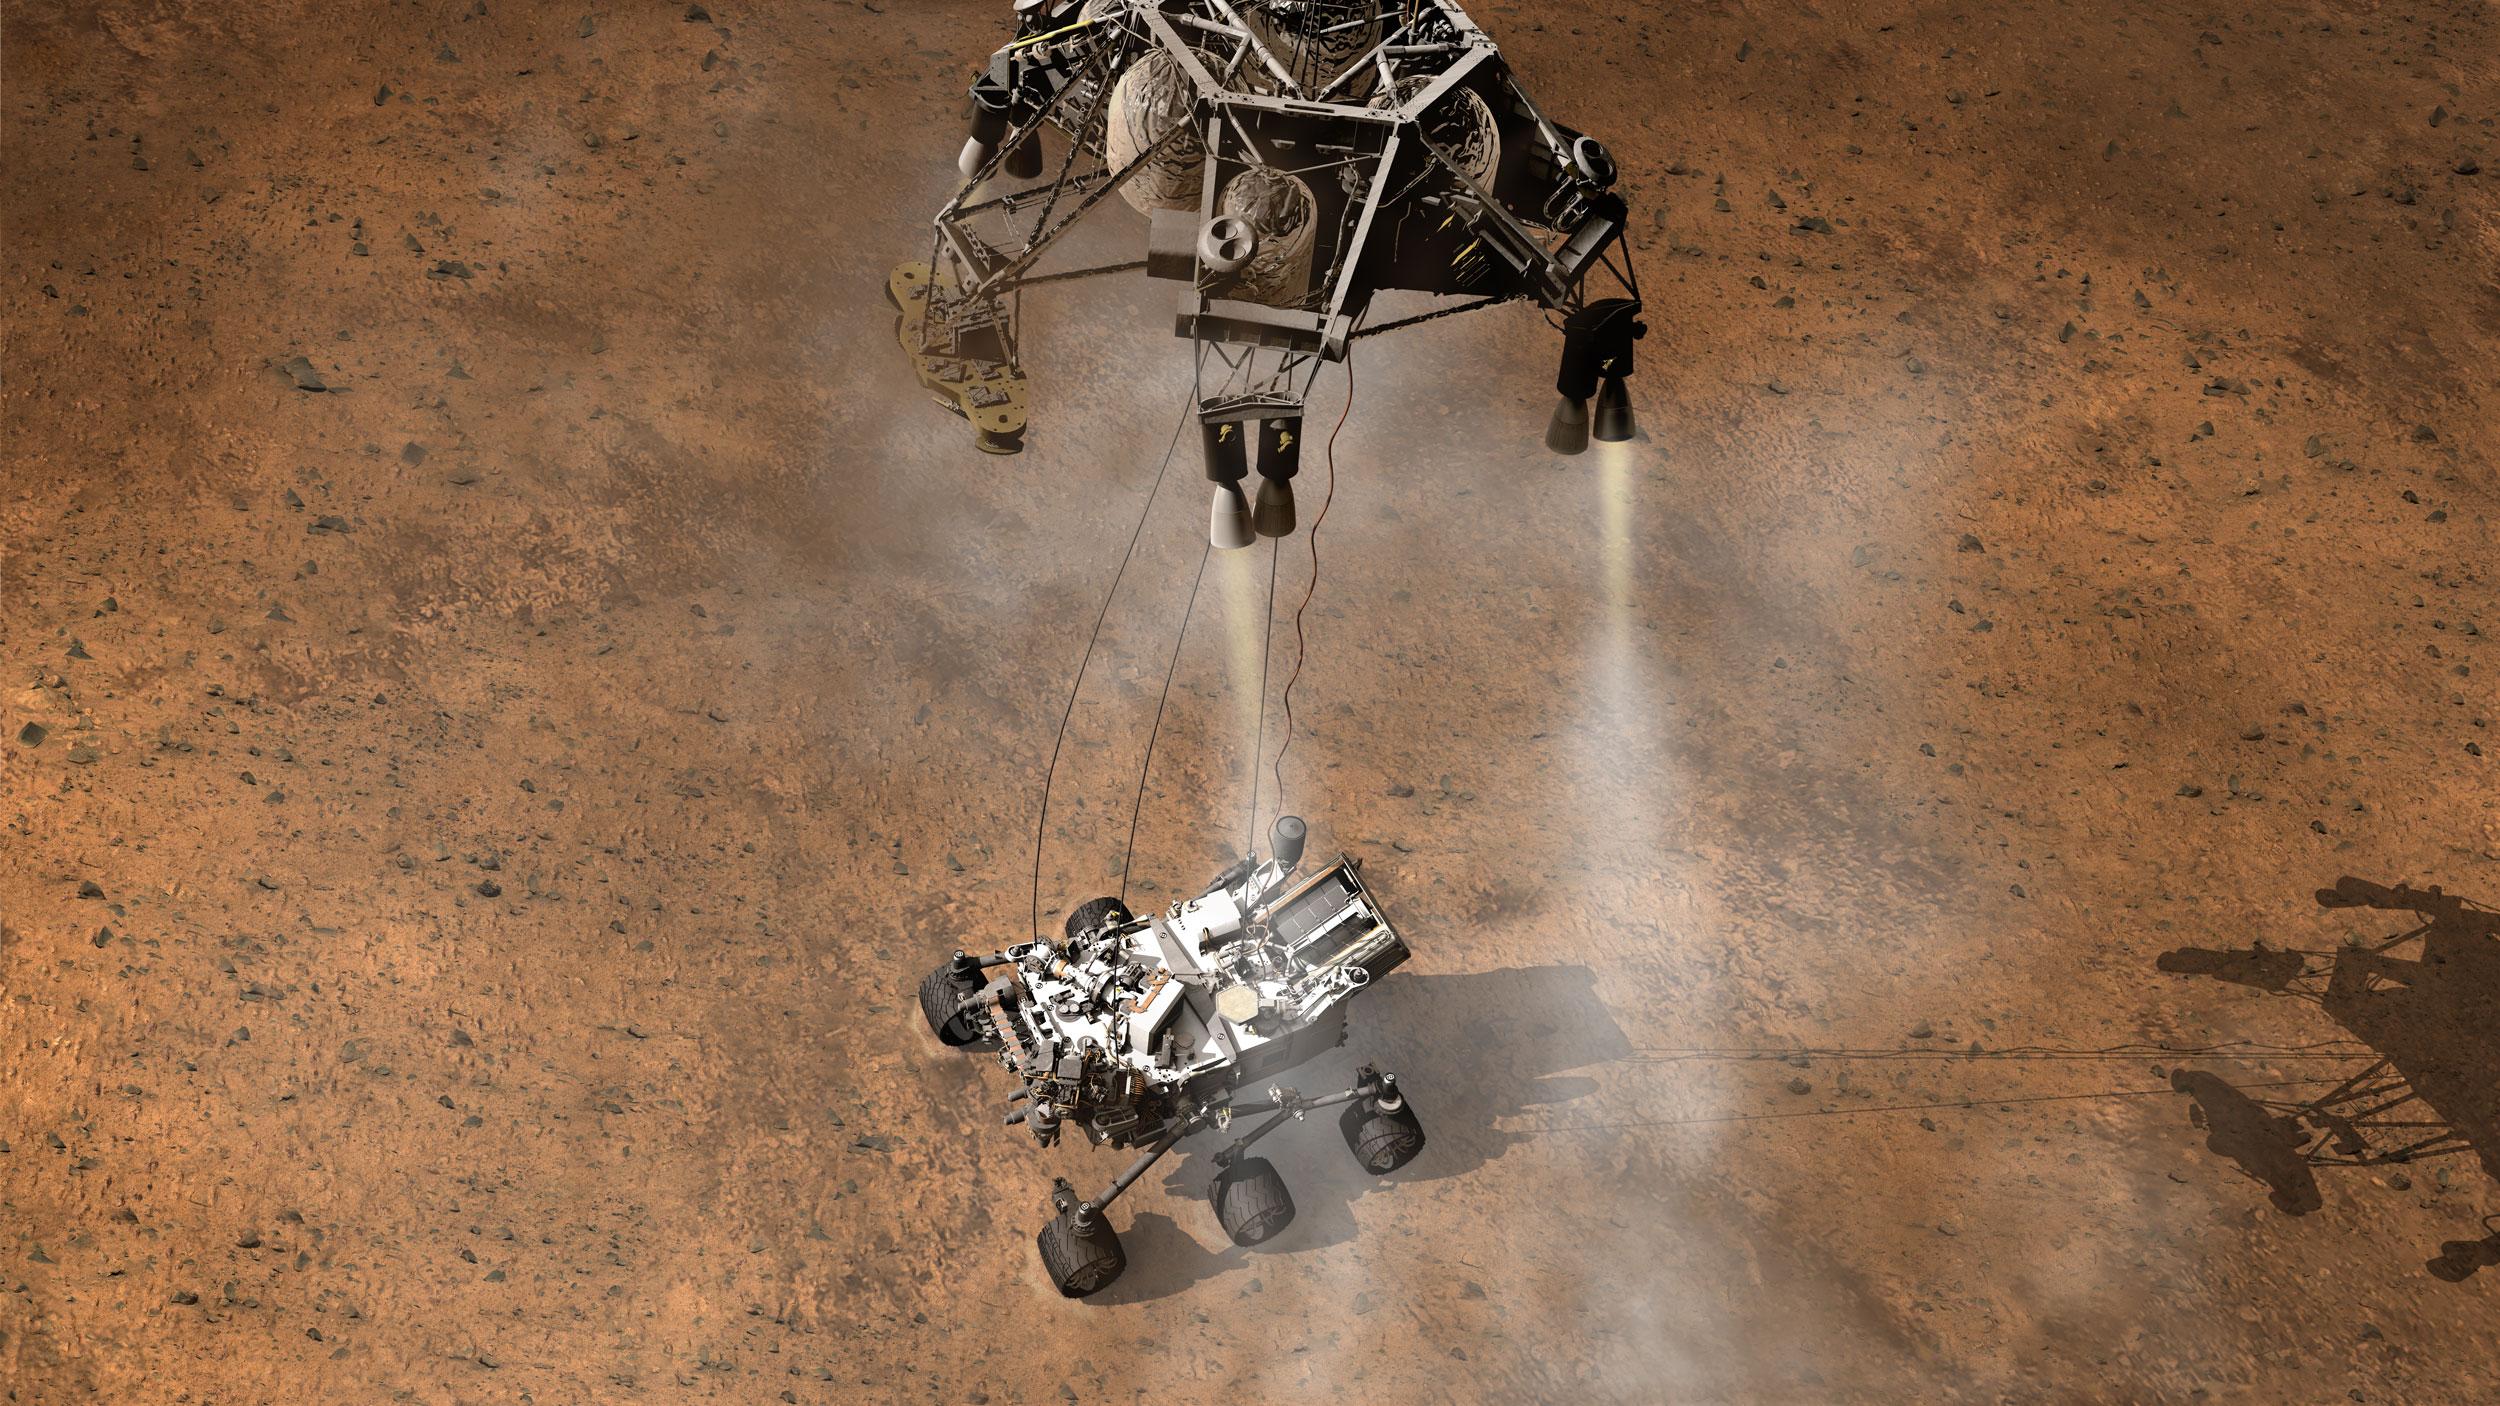 Two Mars scientists prepare for Curiosity’s descent to the red planet